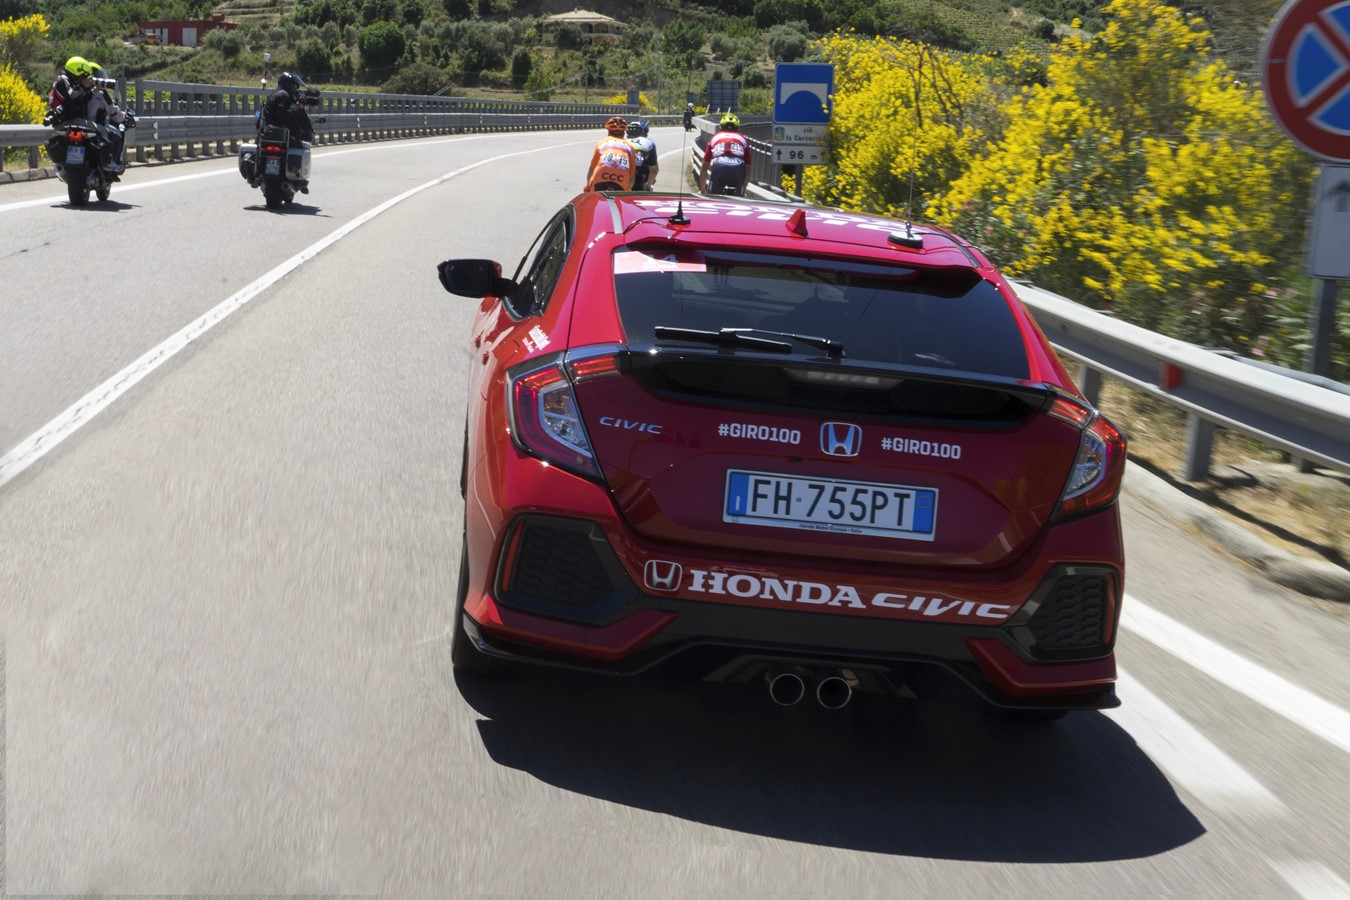 Honda features as official sponsor and supplier of cars and motorcycles for the 100th Giro d'Italia